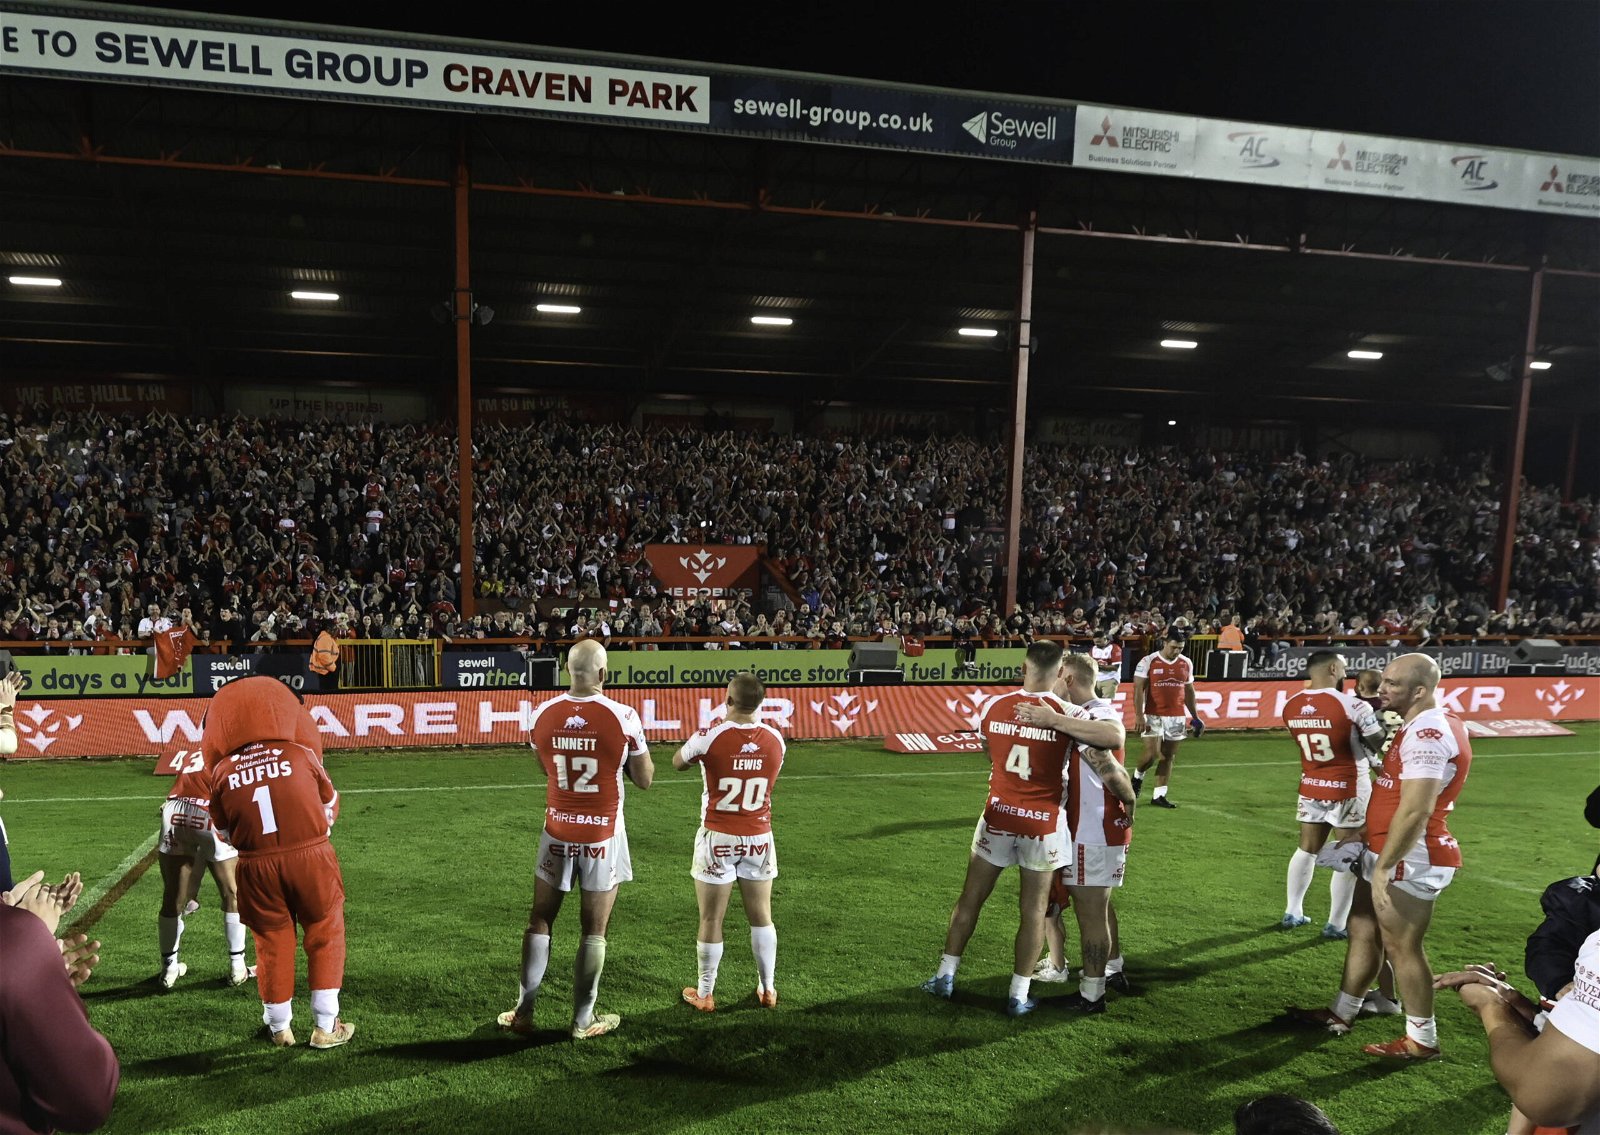 Hull KR players clap in front of a full stand at Craven Park